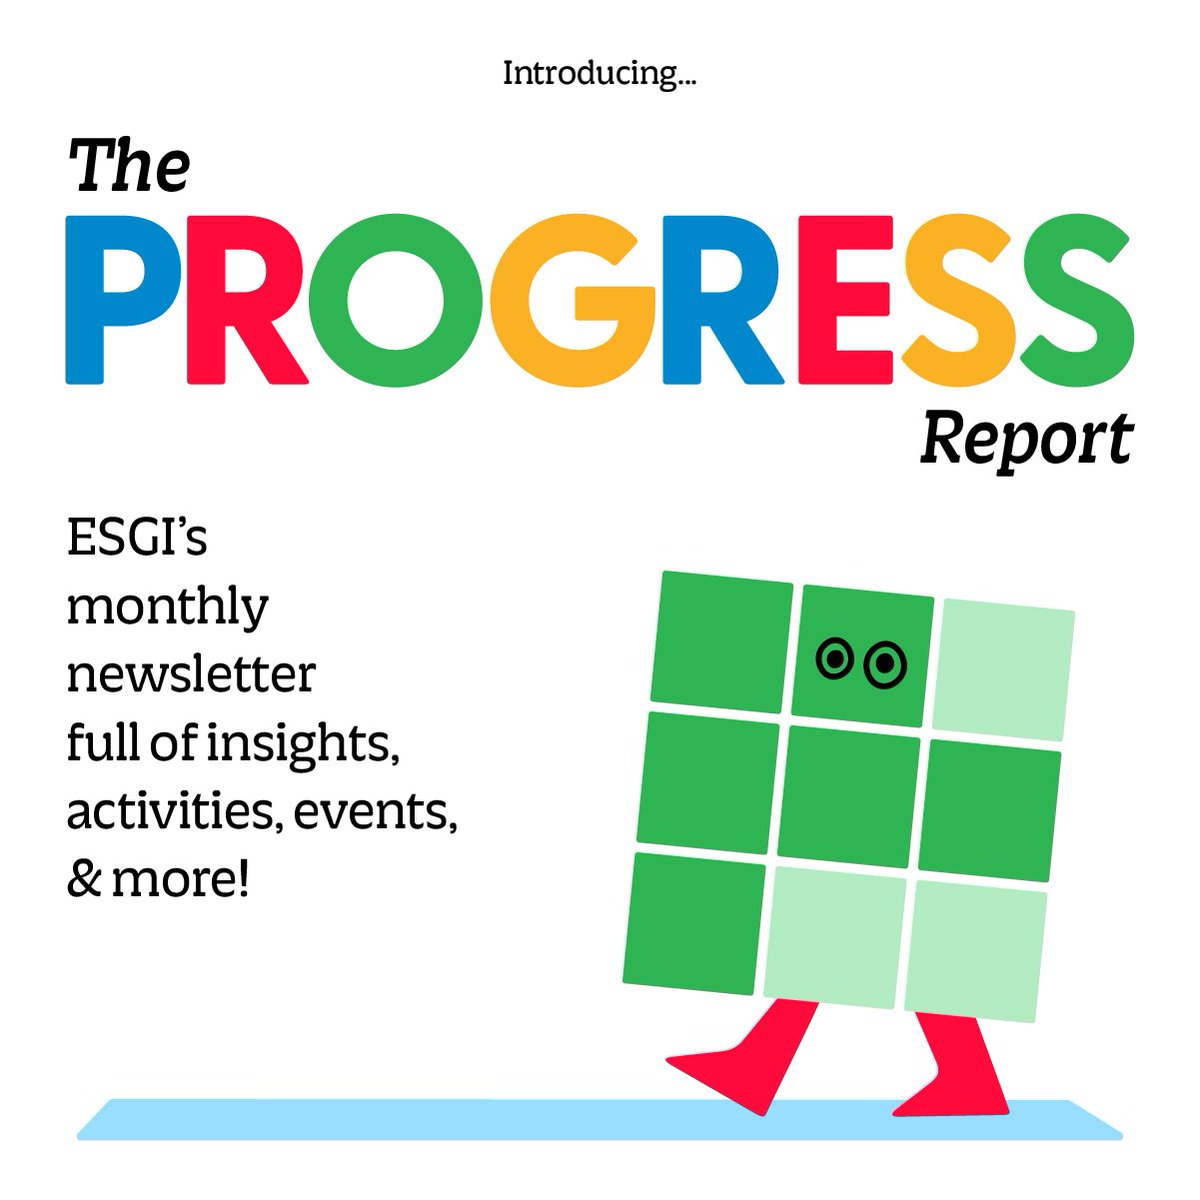 Exciting News! Our brand new teacher newsletter, The Progress Report, is launching tomorrow! Stay ahead of teaching trends, catch up on all things ESGI, and be the first to know about upcoming events! Subscribe now: hubs.la/Q02tcWpt0 #TheProgressReport #TeacherNewsletter